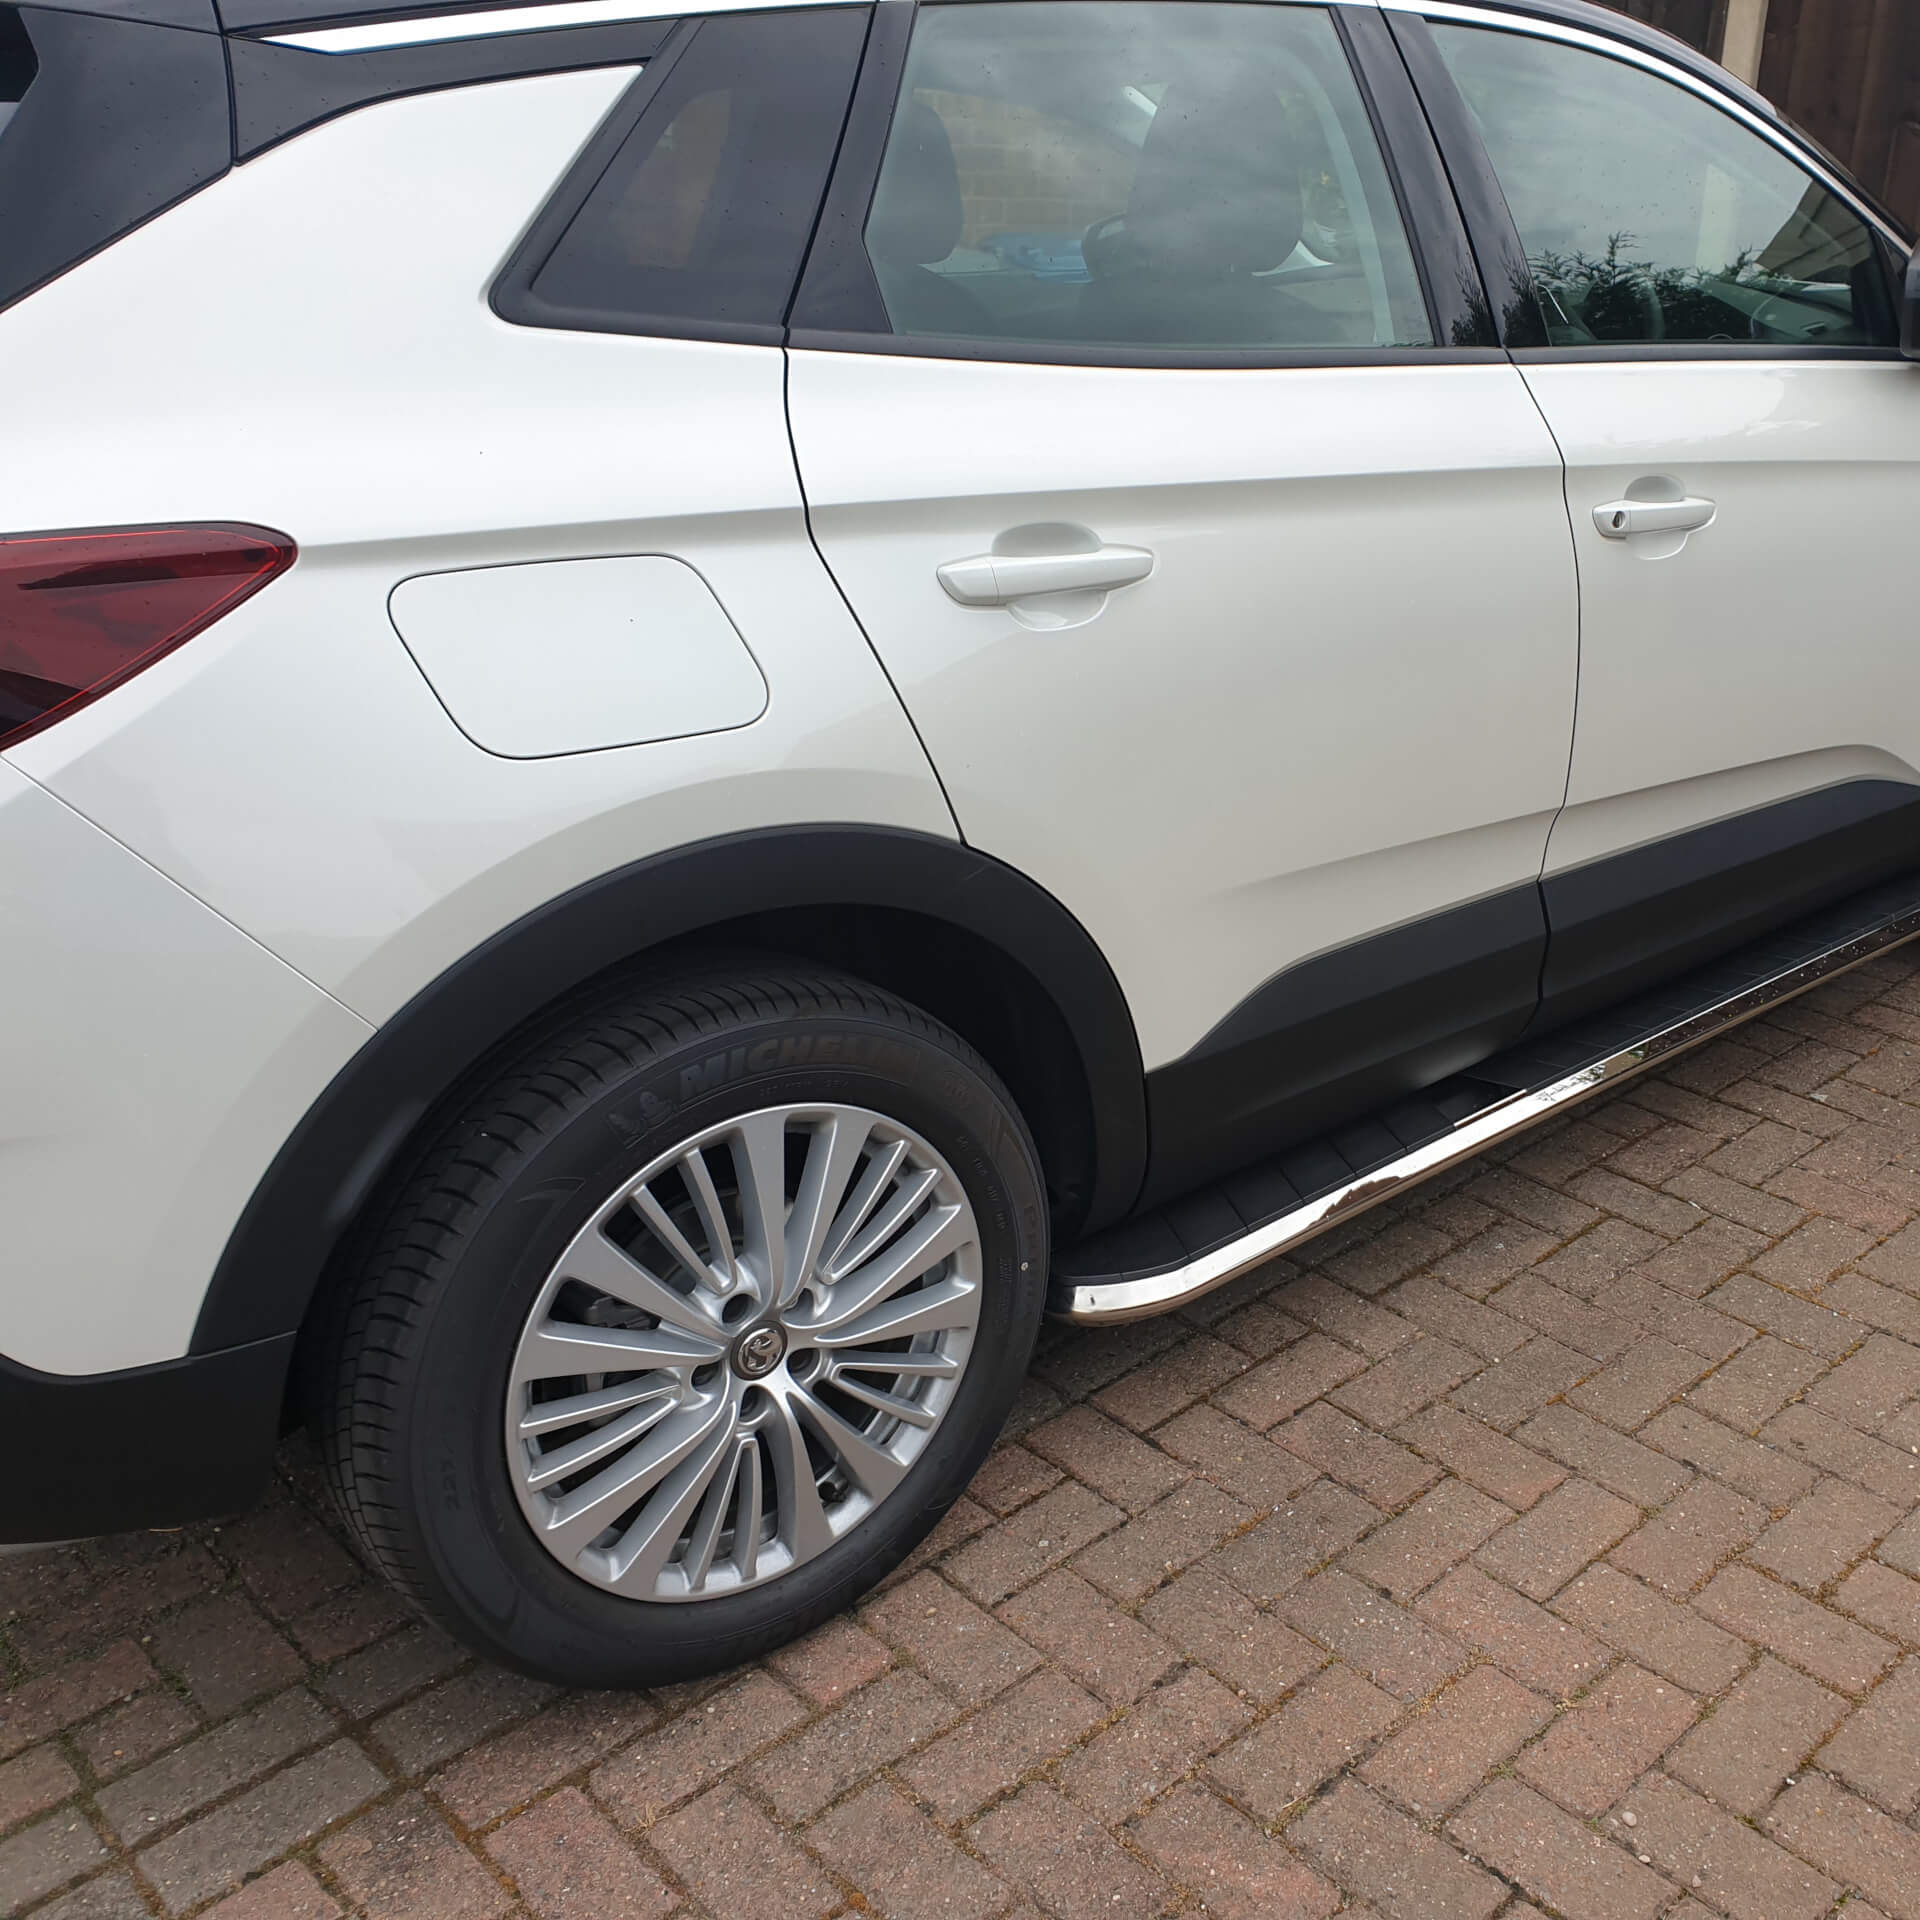 Direct4x4 accessories for Vauxhall Grandland X vehicles with a photo of a white vauxhall grandland x parked on a brick driveway fitted with high flyer style side steps